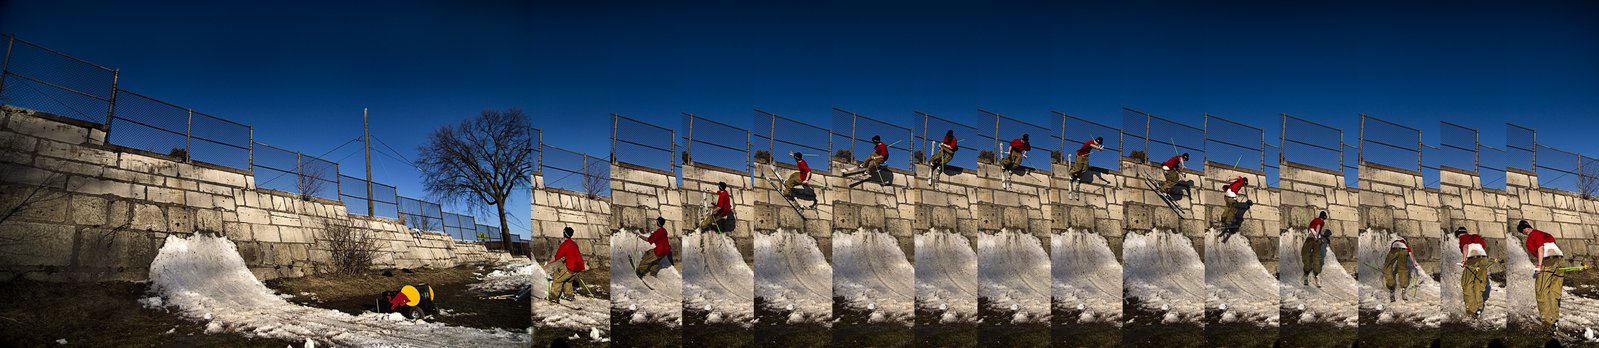 Chris Mckeever/Red Bull Wiinch Sequence